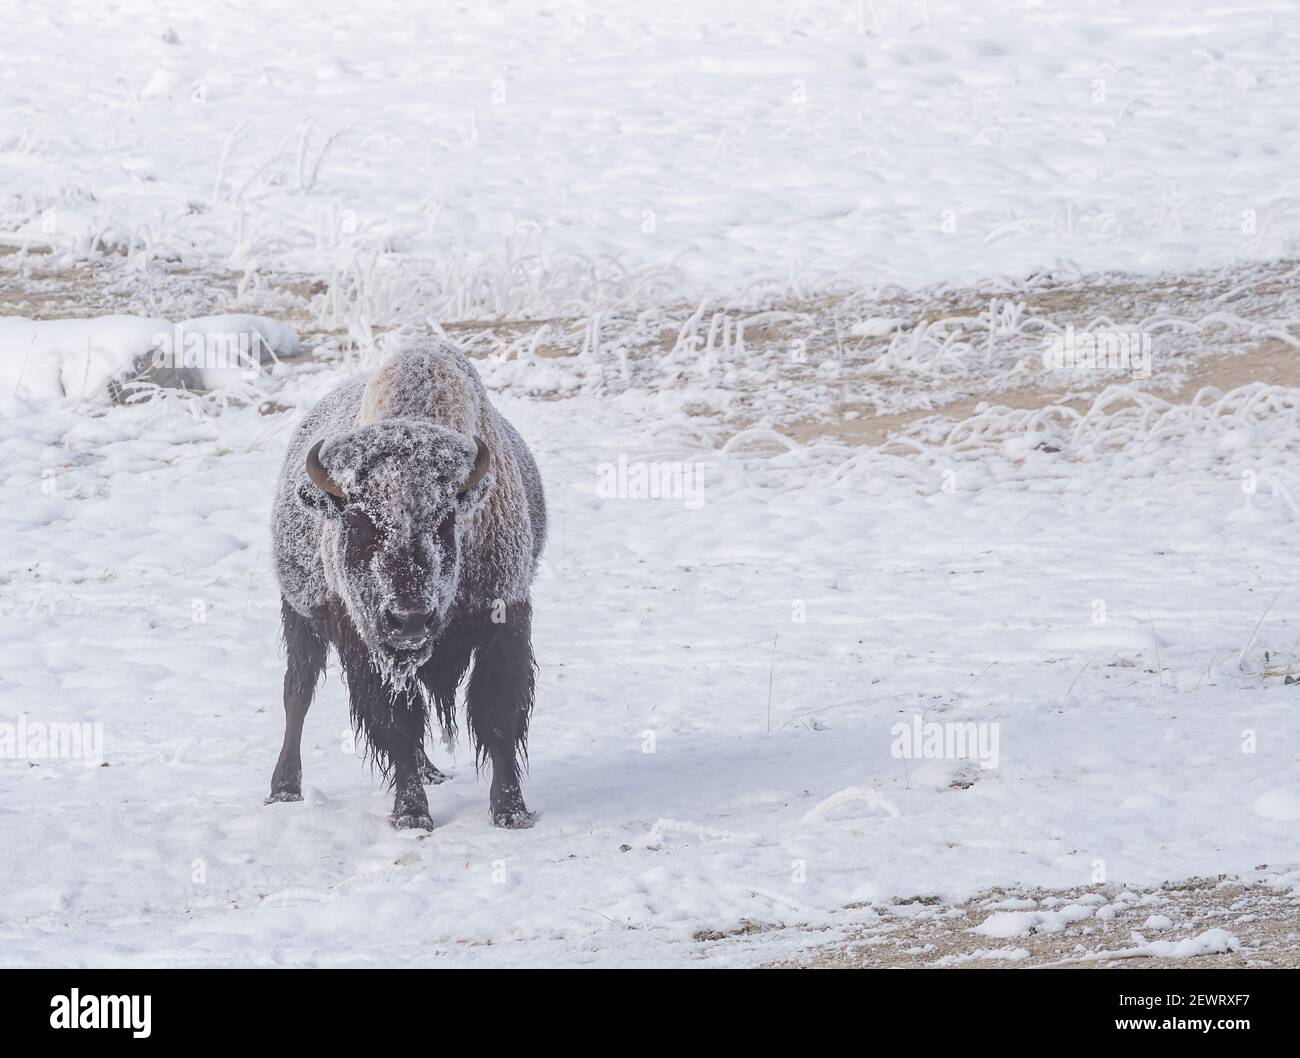 Frozen bison (Bison bison), in snowy field, Yellowstone National Park, UNESCO World Heritage Site, Wyoming, United States of America, North America Stock Photo